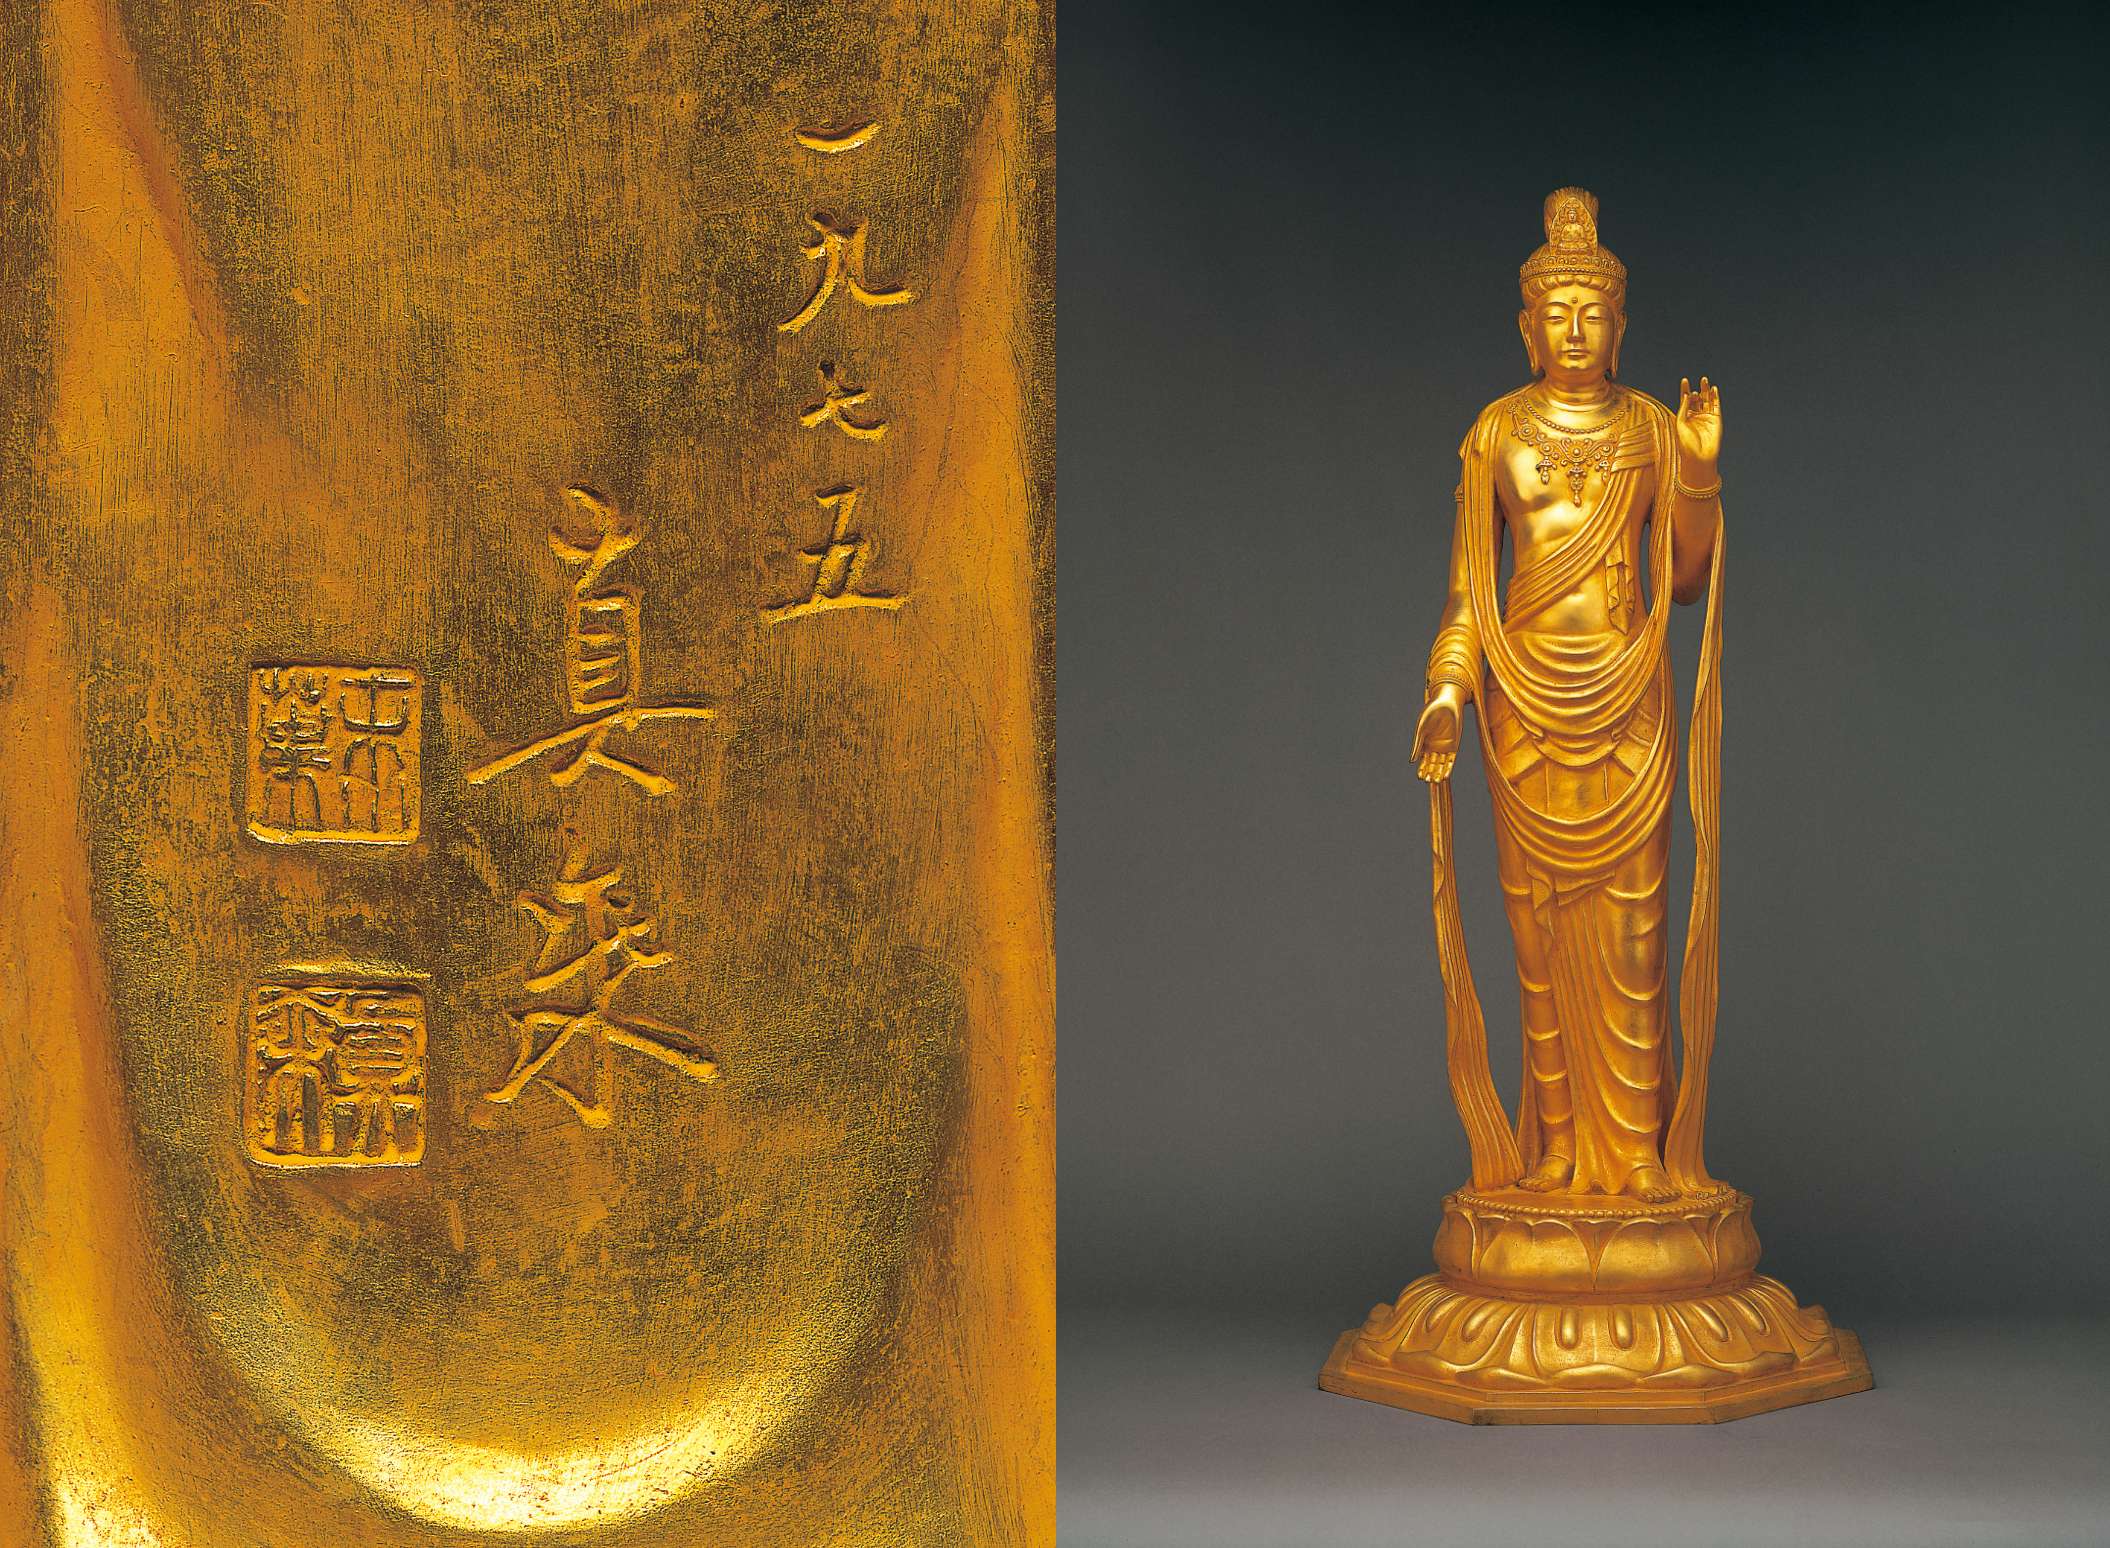 A golden hued statue of a bodhisattva standing atop a lotus wearing lower robes, with a scarf circling torso and draping to sides, right hand lowered in gesture of giving, left in gesture of teaching (right). A close-up of the back of the statue showing Japanese calligraphy and stamps etched into a smooth portion of the metal between the falling drapery of the bodhisattvas robes (left).